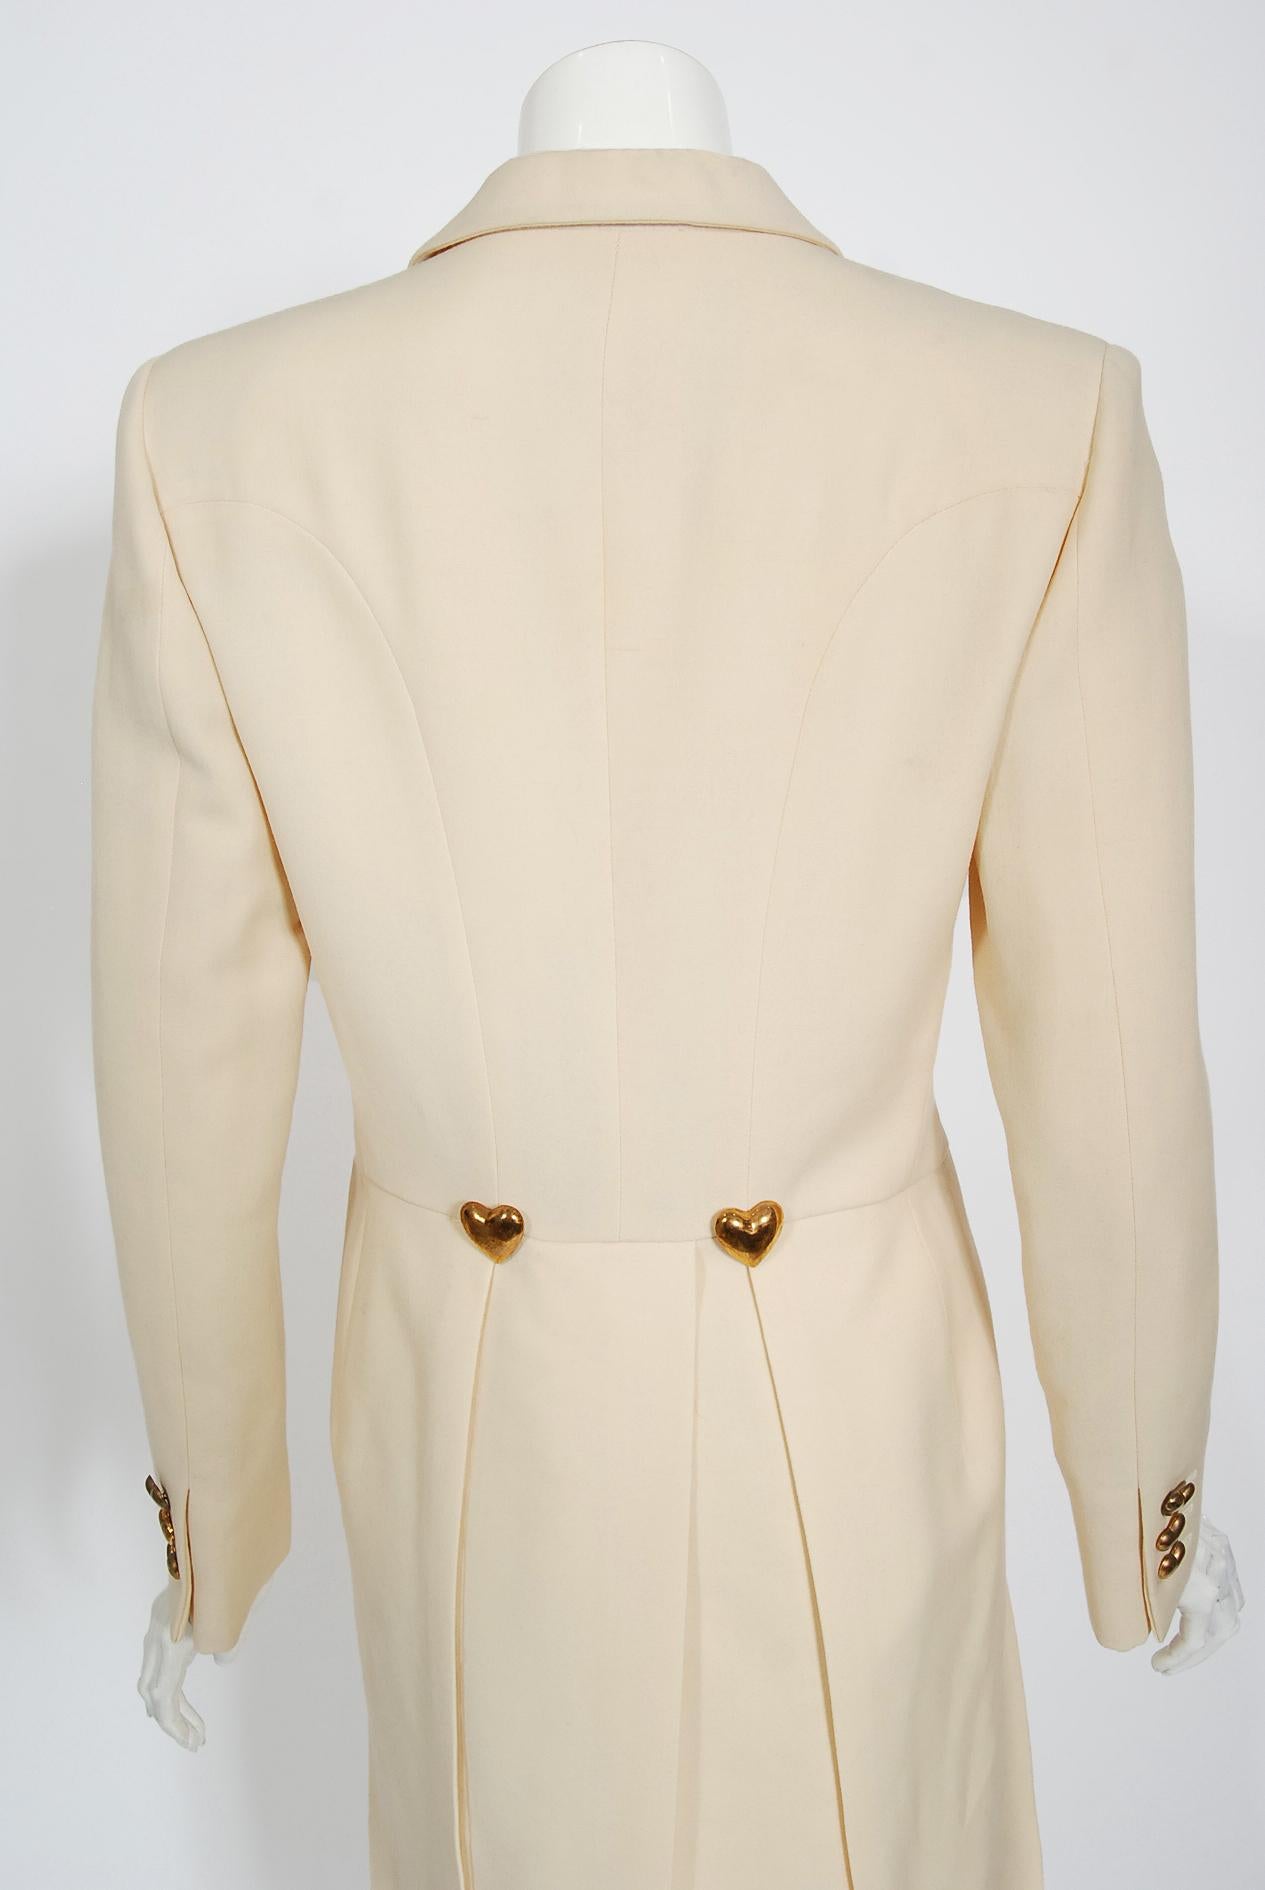 Vintage 1993 Moschino Couture Cream Wool Heart Buttons Tuxedo Jacket & Pants Set 6